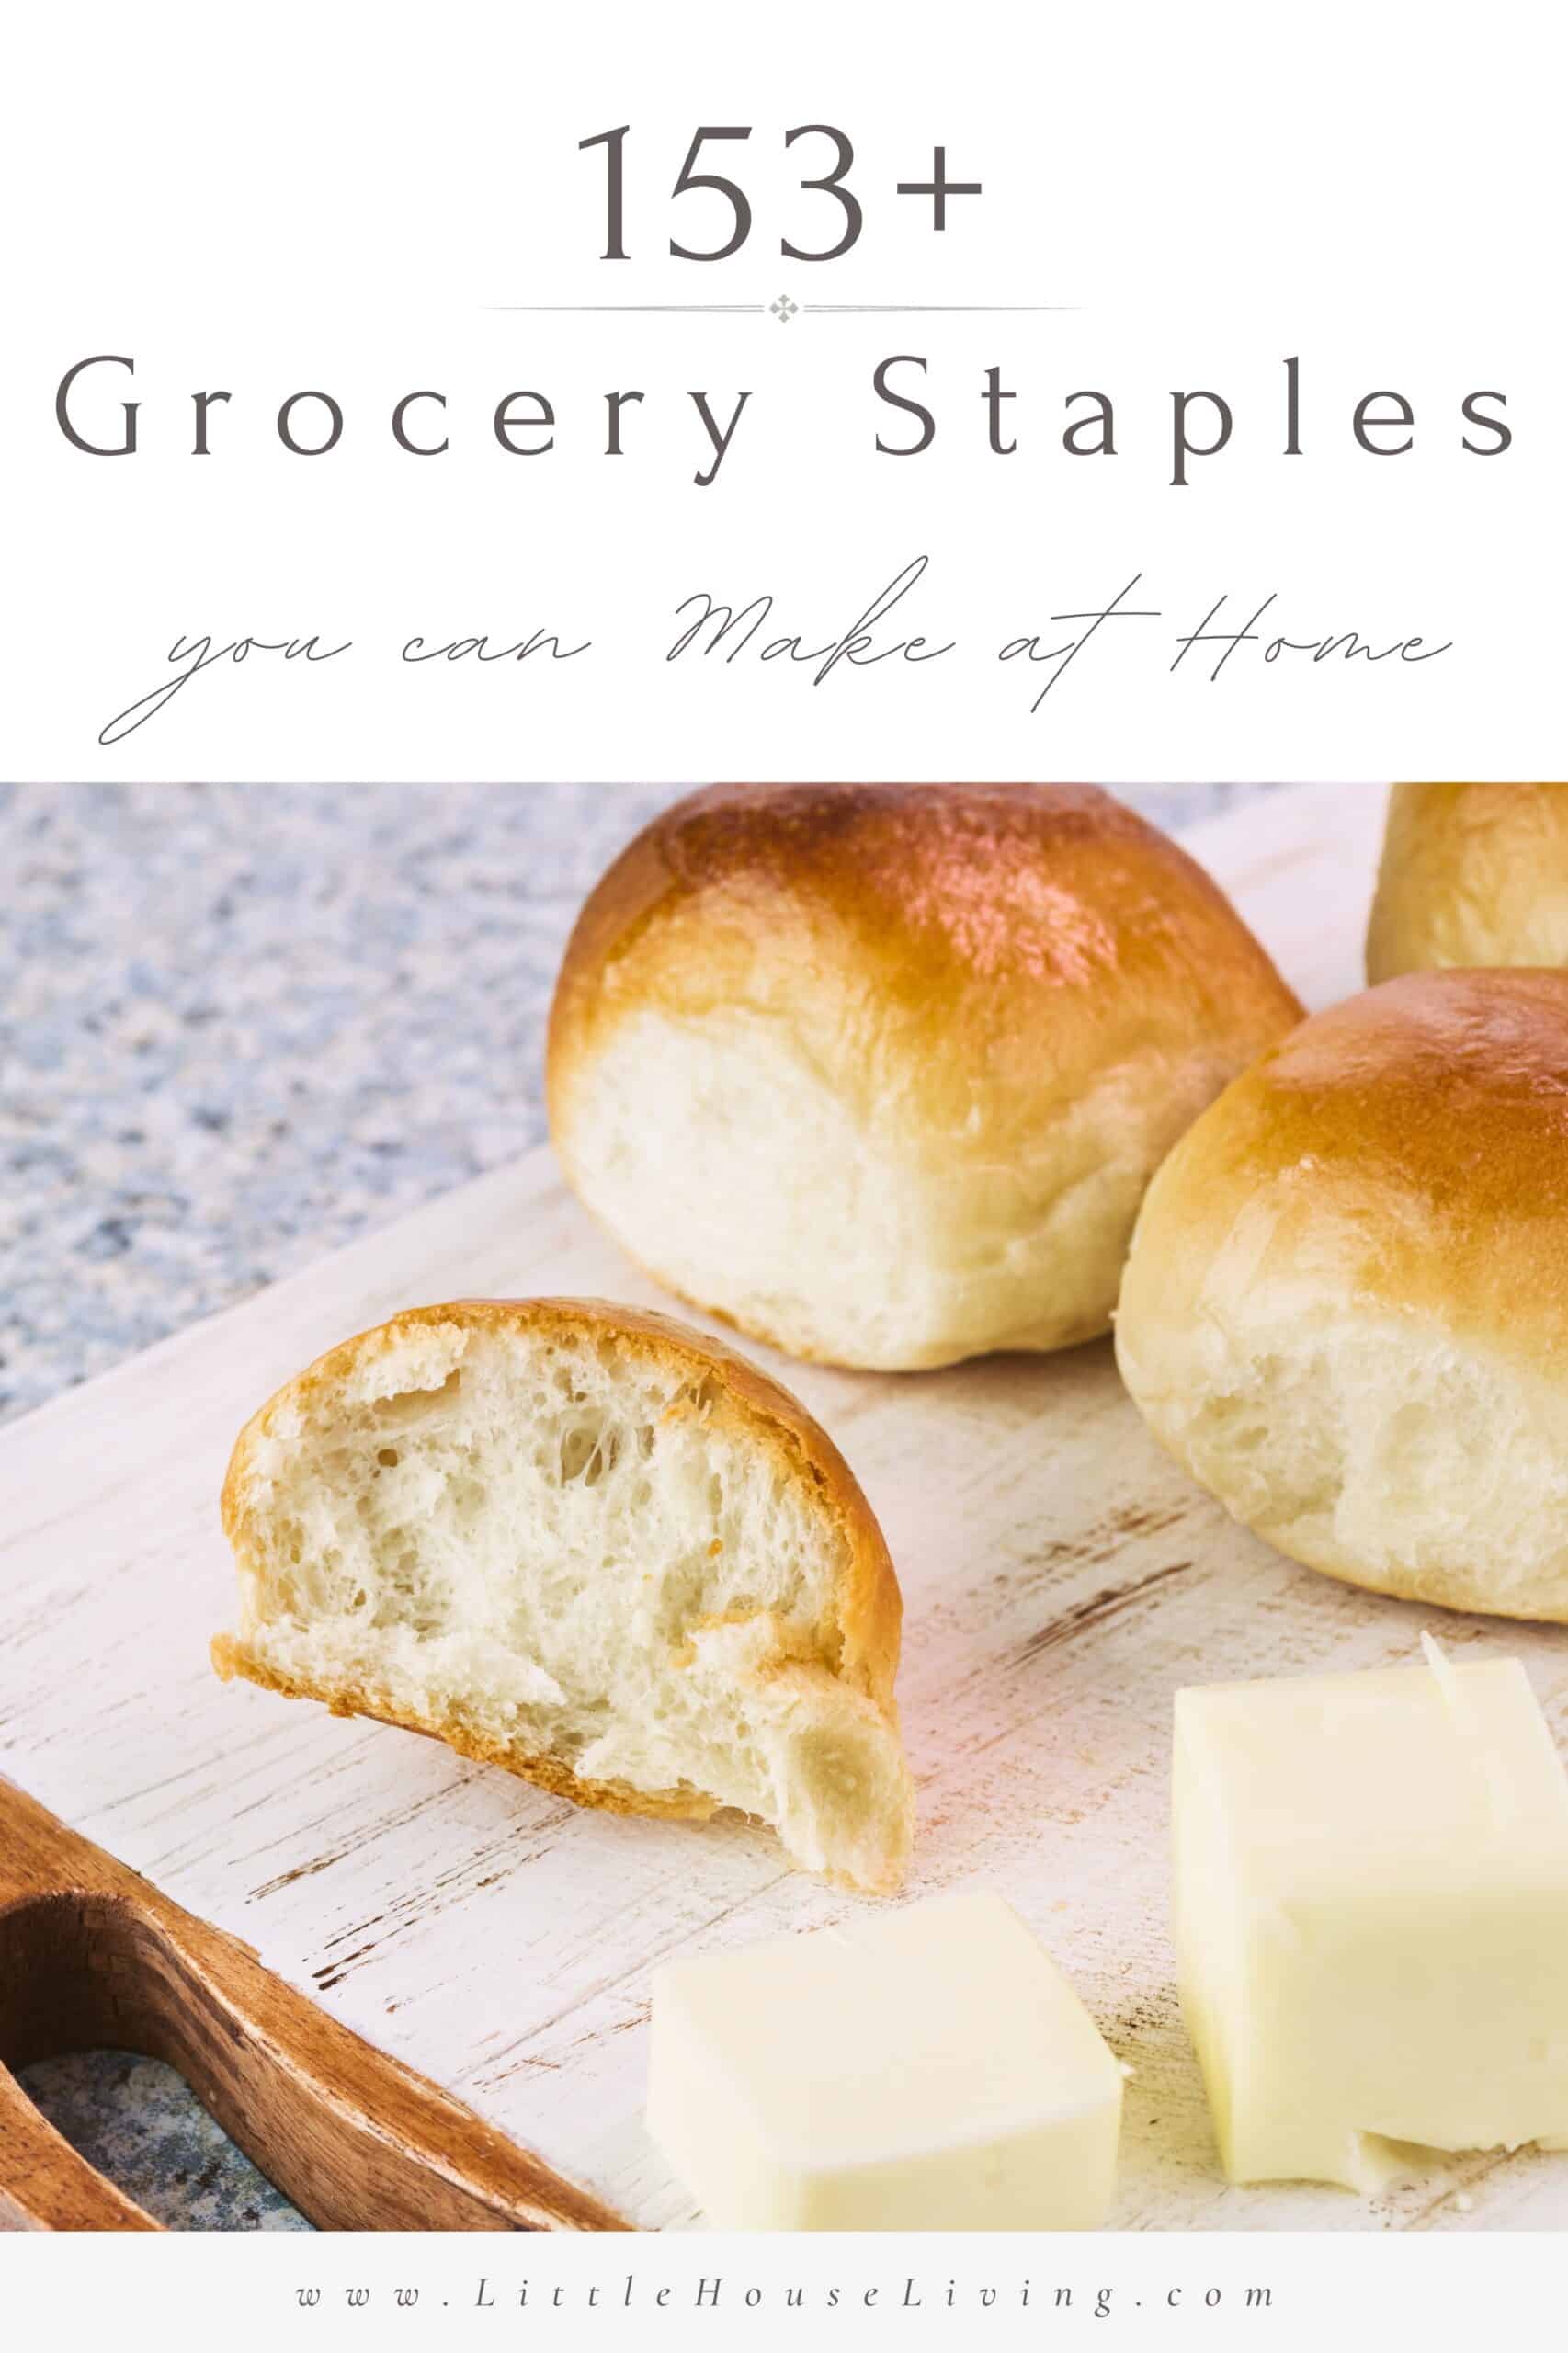 Tired of paying high grocery store prices and getting subpar products for your money? Here's a HUGE list of grocery staples that you can make at home.